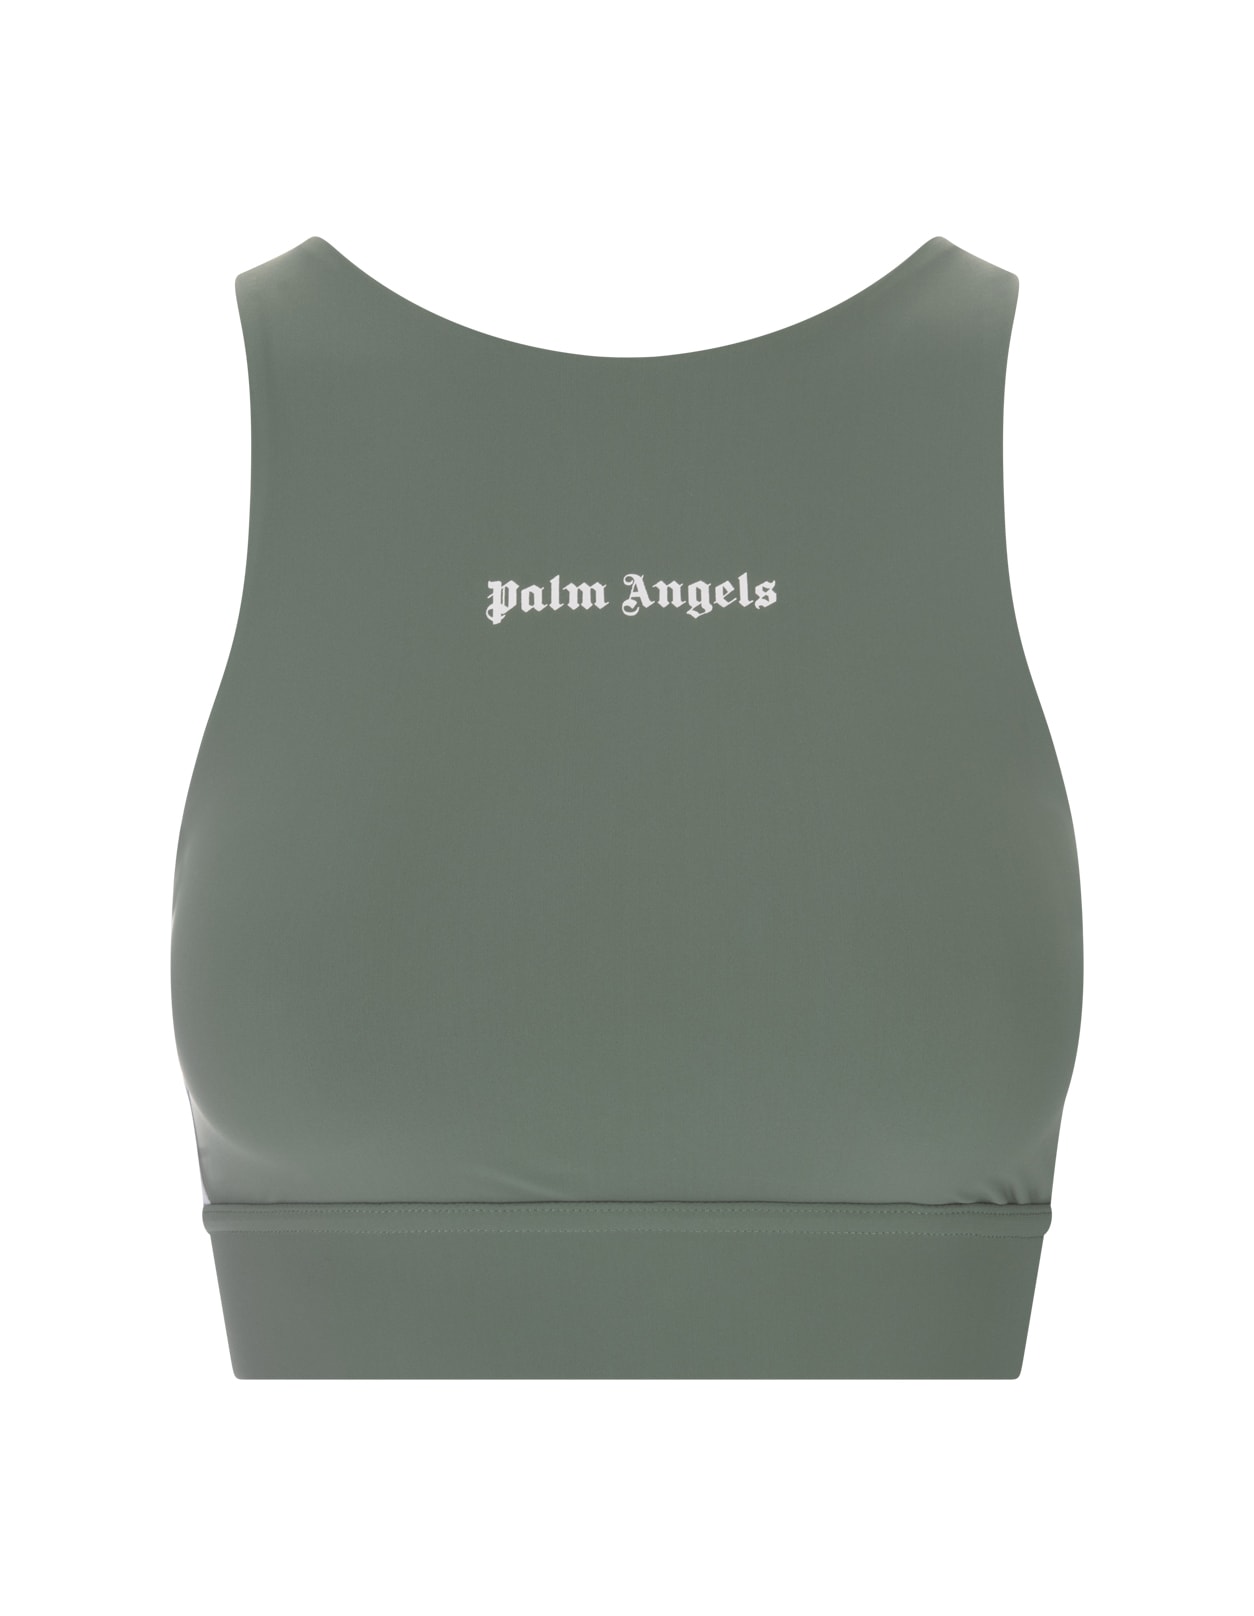 PALM ANGELS SAGE GREEN SPORTS TOP WITH LOGO AND SIDE BANDS IN CONTRAST